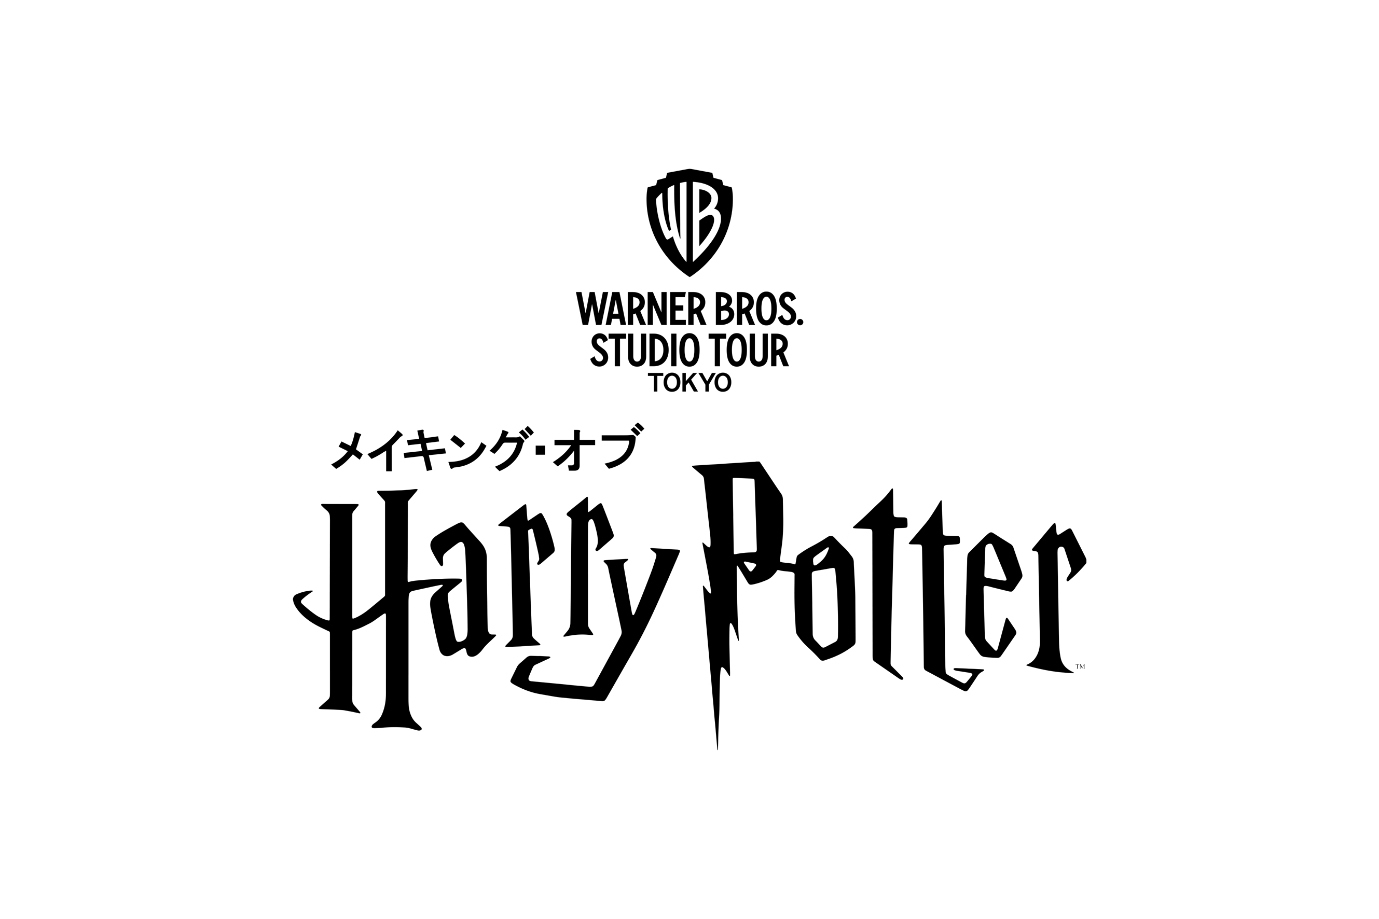 ‘Wizarding World’ and all related names, characters and indicia are trademarks of and -Warner Bros. Entertainment Inc.  (c) Wizarding World publishing rights (c) J.K. Rowling.